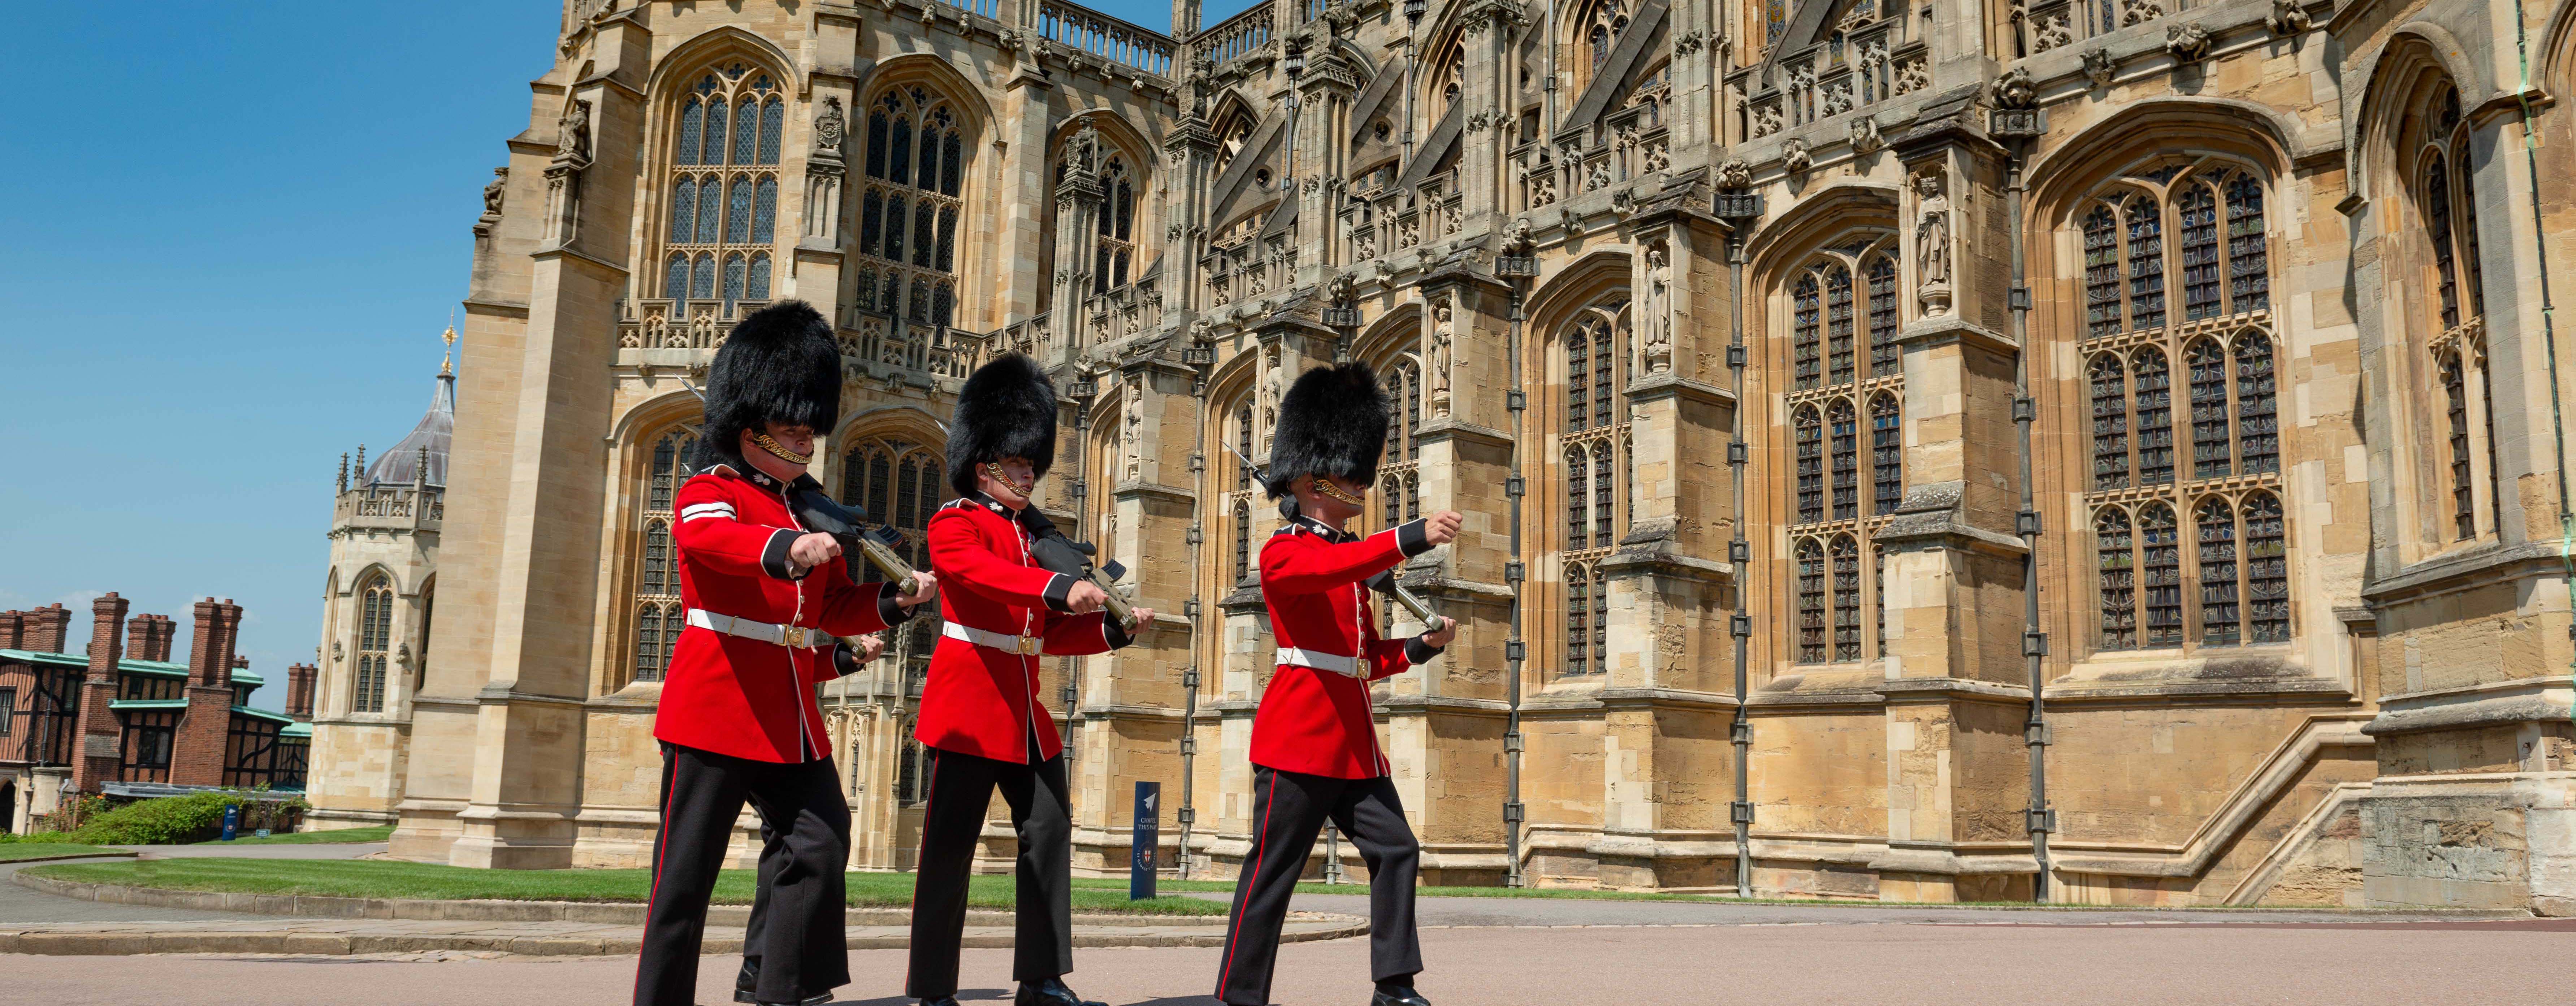 Soldiers walk past St George's Chapel